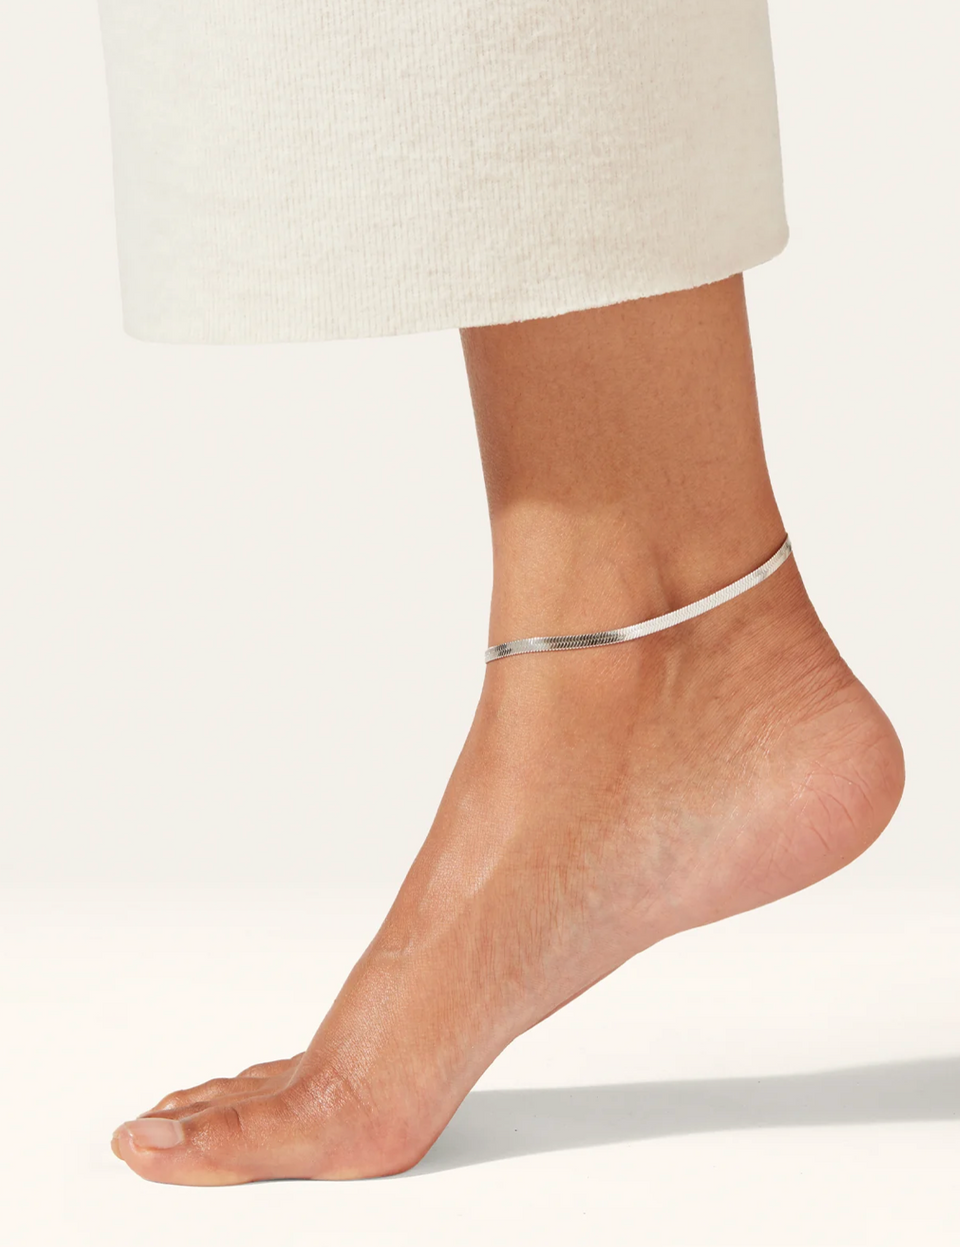 The Jenny Bird Zeina Anklet in Silver 